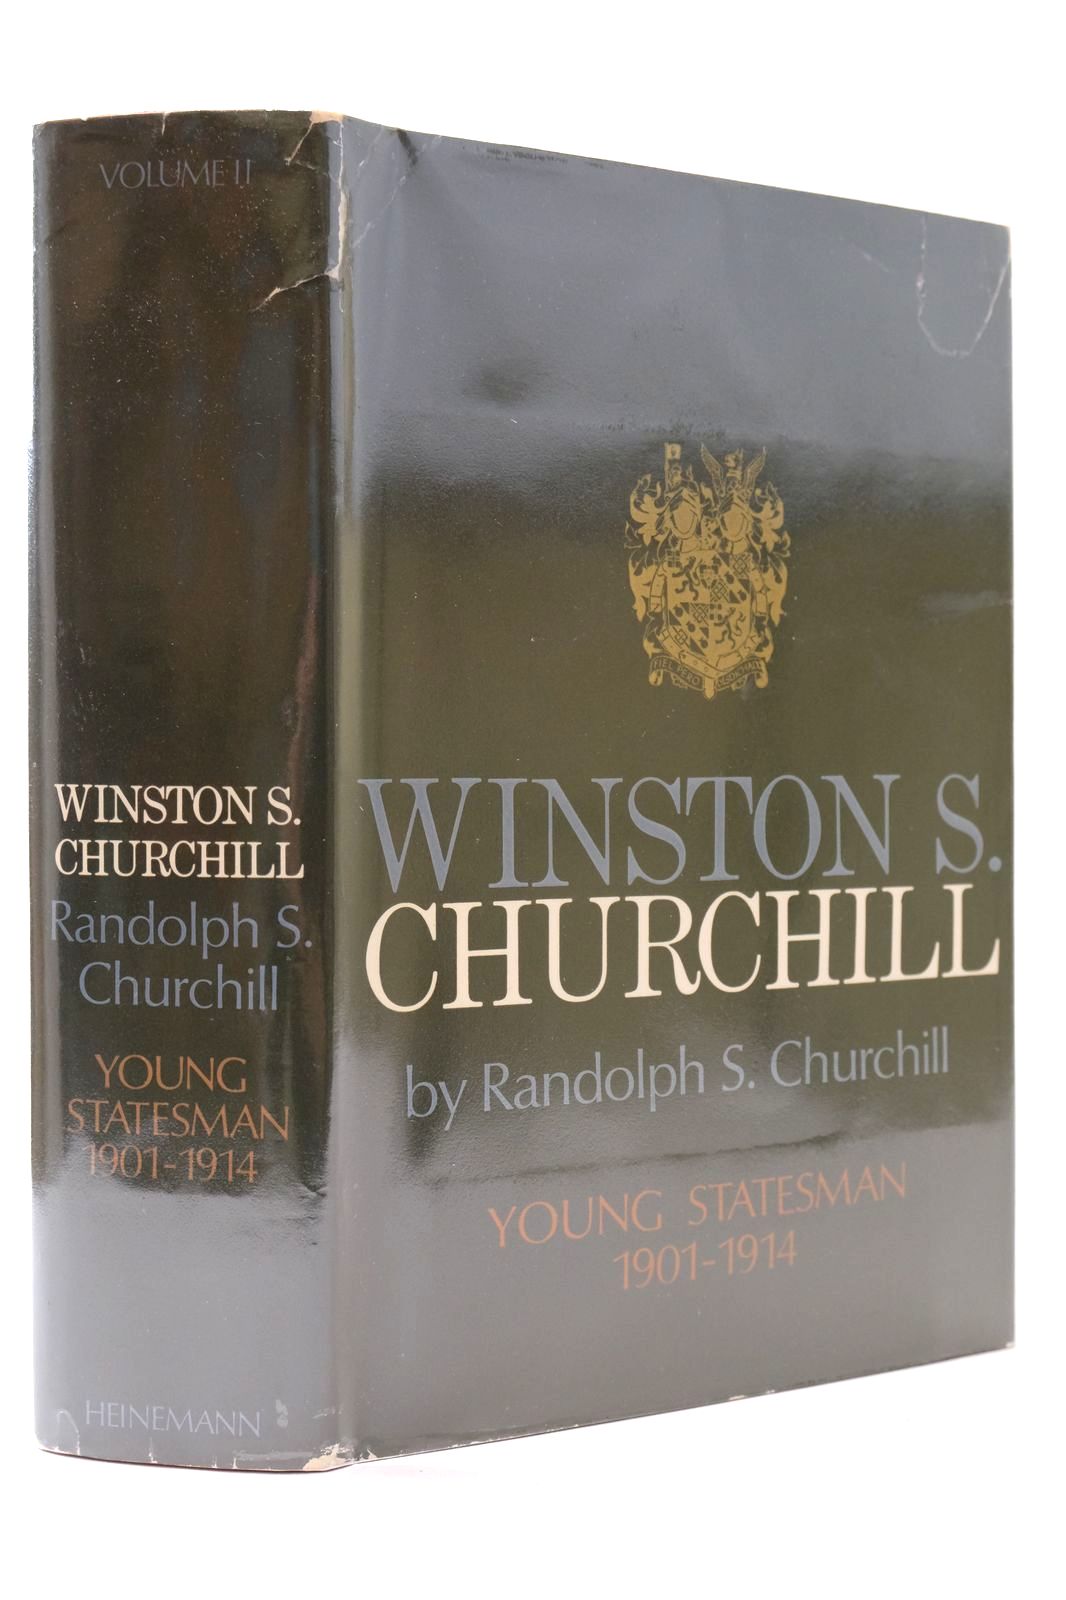 Photo of WINSTON S. CHURCHILL VOLUME II YOUNG STATESMAN 1901-1914 written by Churchill, Randolph S. published by Heinemann (STOCK CODE: 2132684)  for sale by Stella & Rose's Books